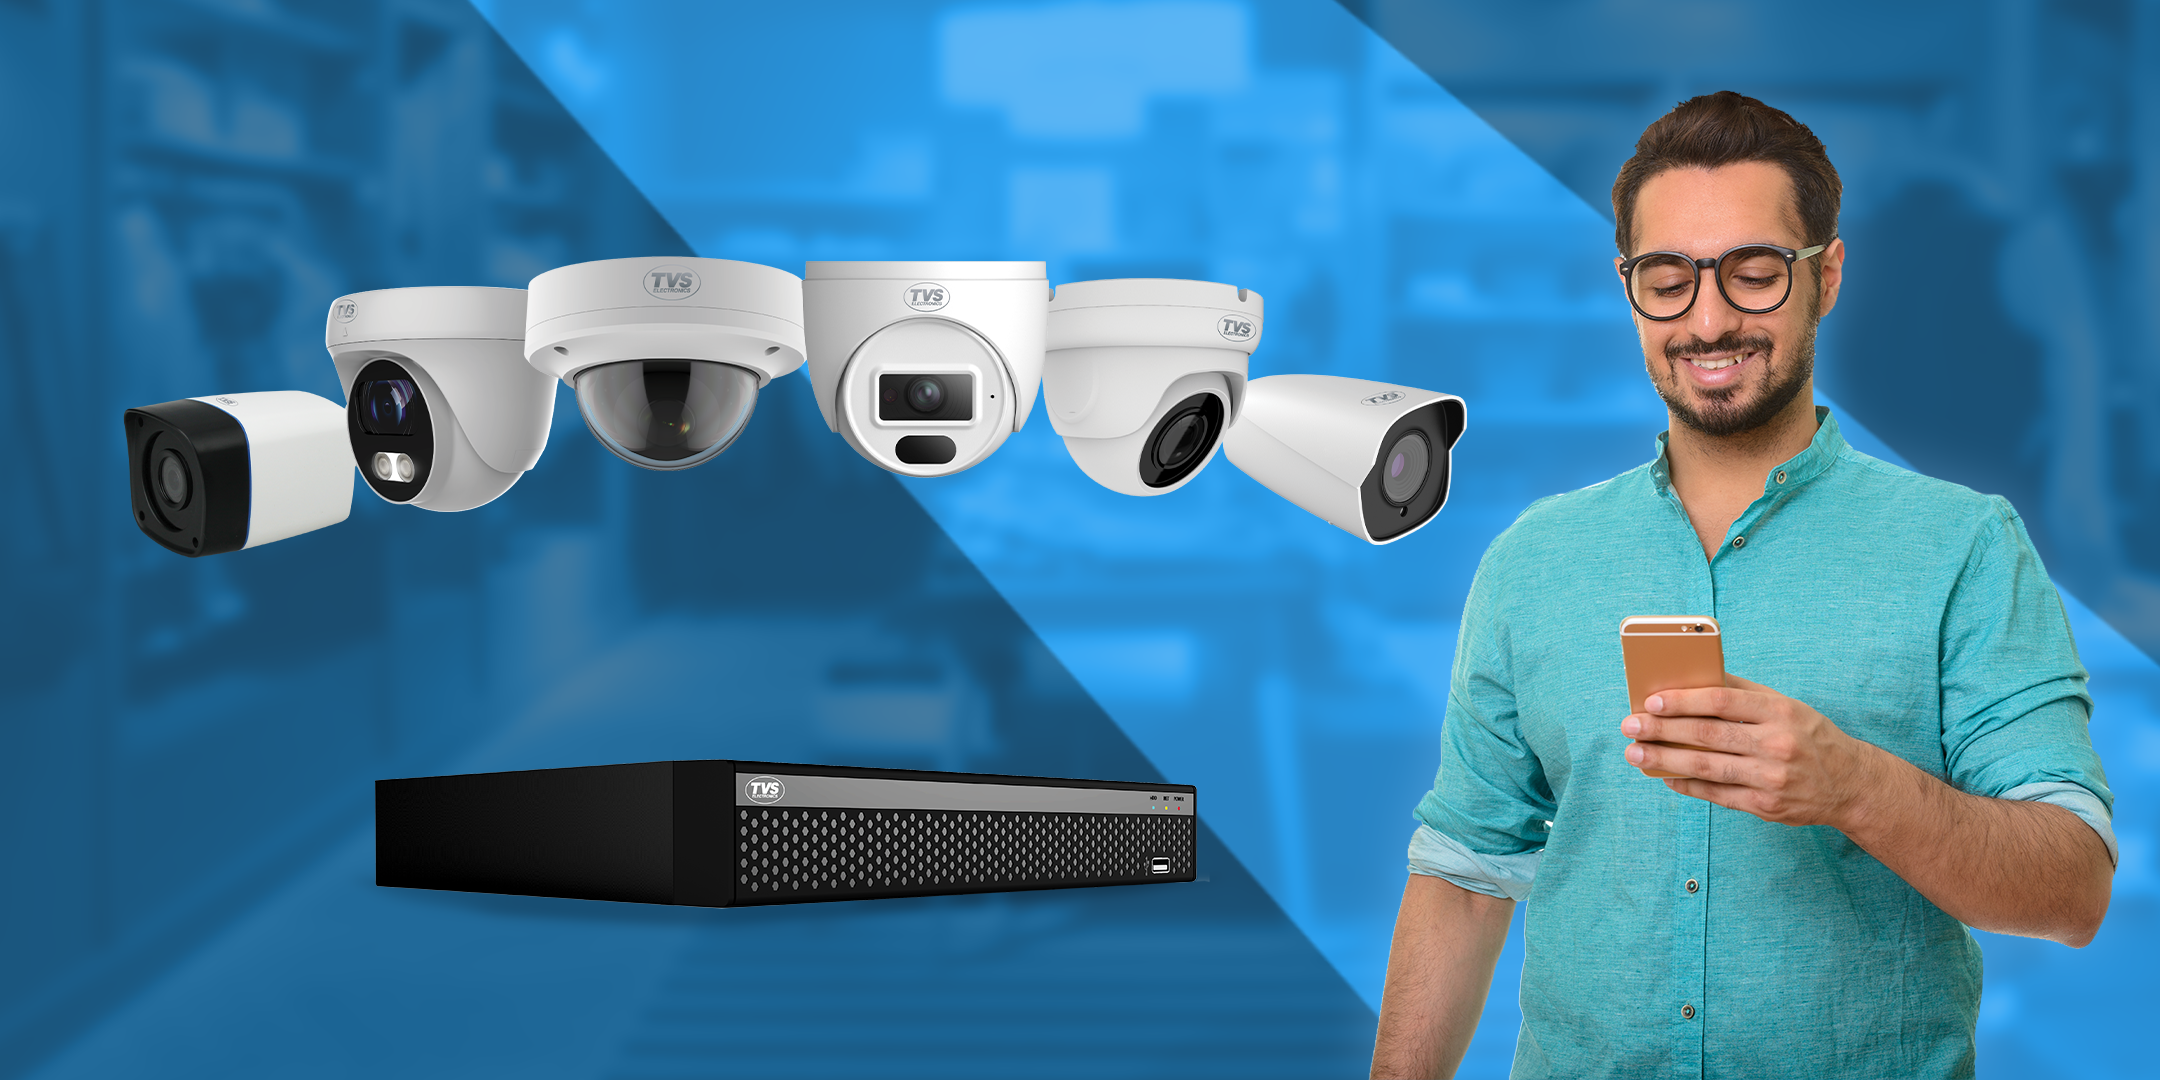 Why Do You Need a CCTV System: Things to Consider Before Buying